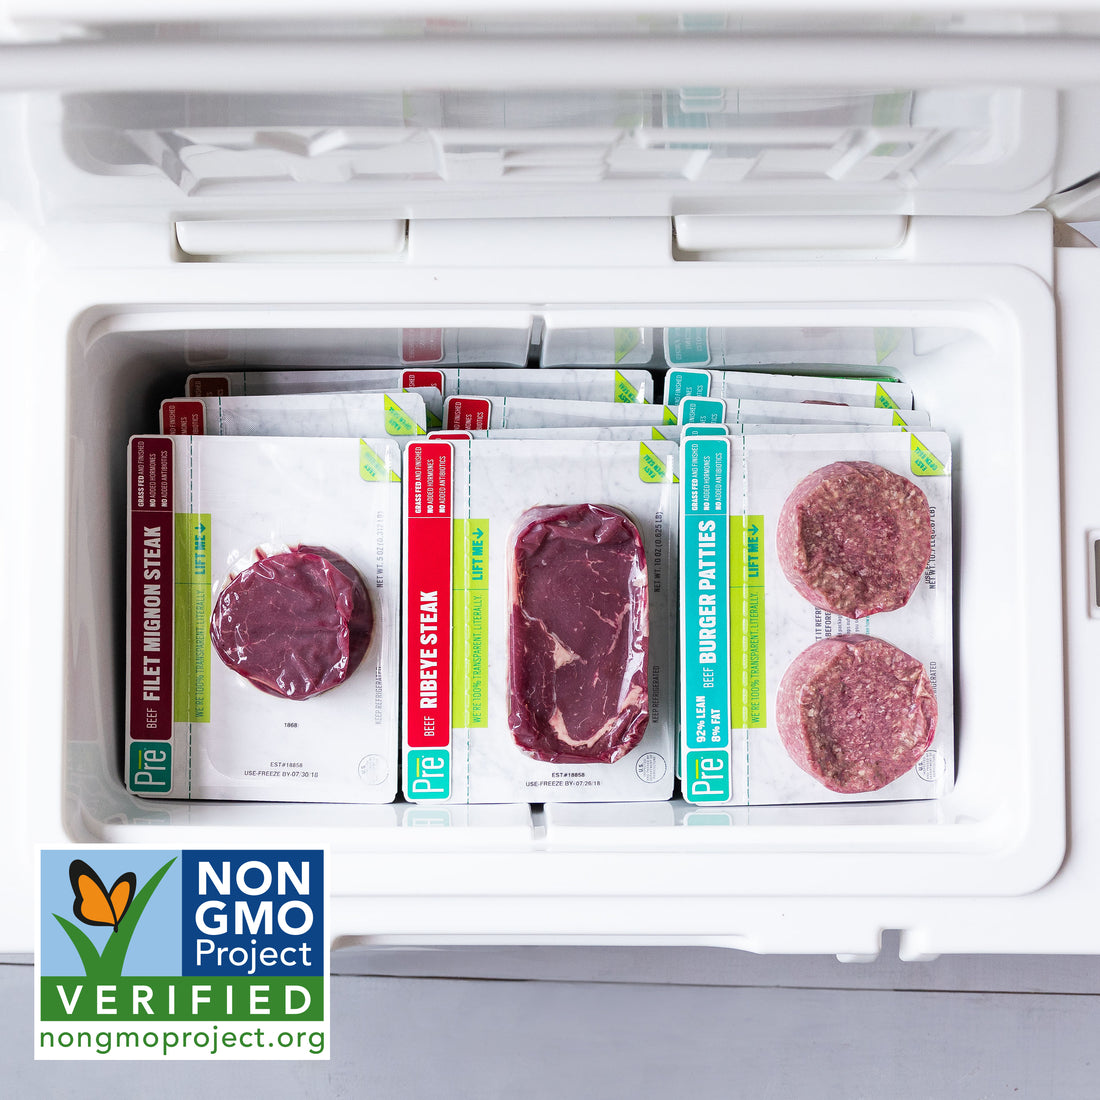 Pre® Brands Beef is Officially Non-GMO Project Verified